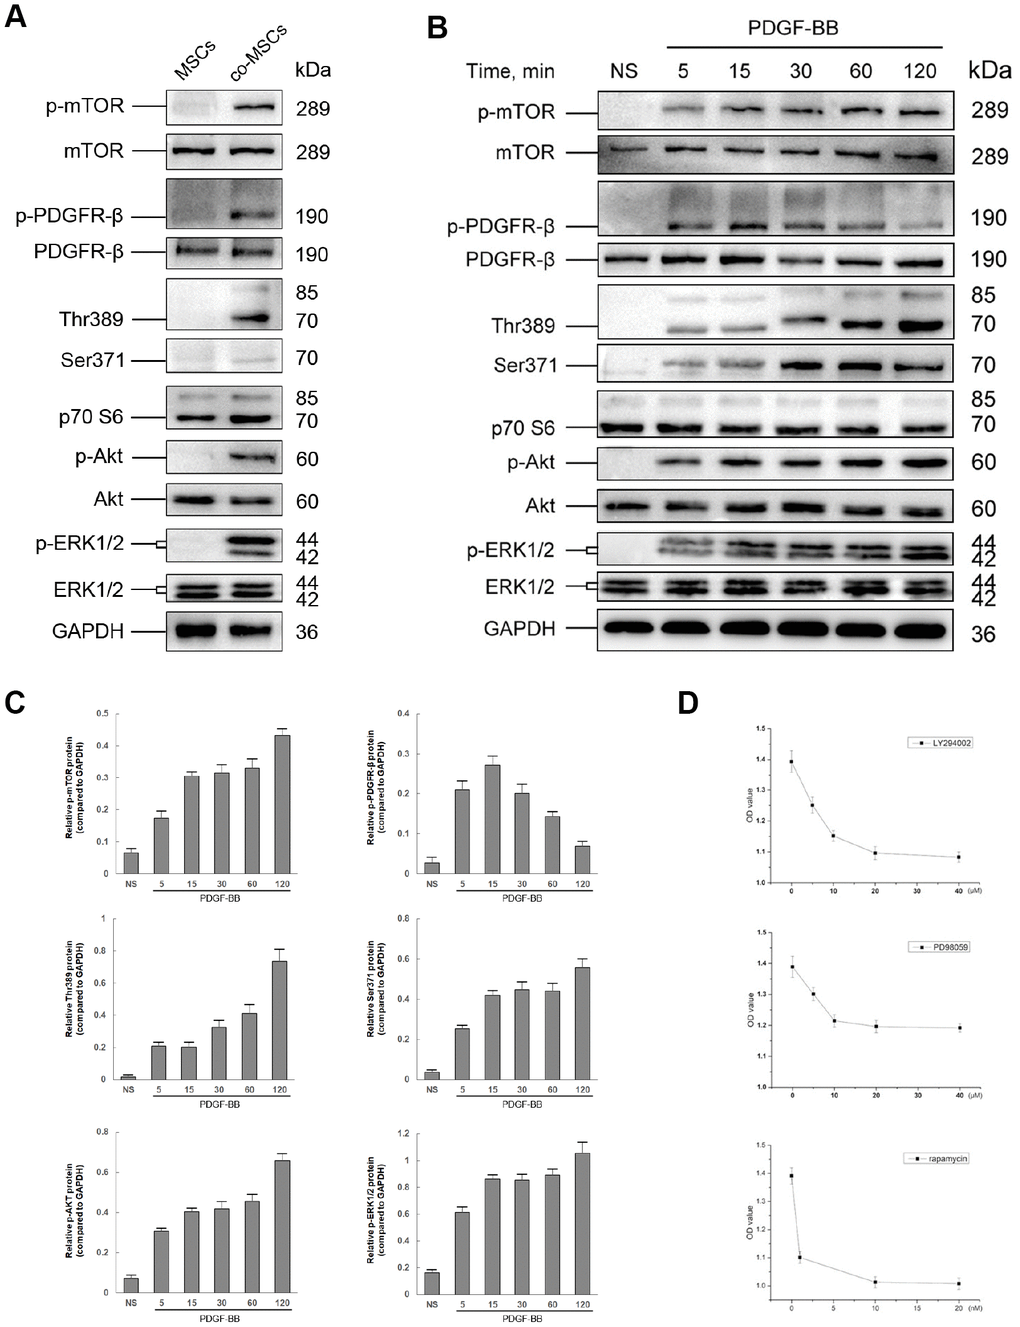 The role of PI3K/Akt and MEK/Erk pathway in PDGF-BB-induced viability of MSCs. Either co-cultured with EPCs or 20 ng/ml PDGF-BB was applied to induced viability of MSCs and the status in phosphorylation of both PI3K/Akt and MEK/Erk pathways was assessed by western blot. Co-cultured with EPCs, the co-MSCs revealed phosphorylation of PDGFR-β, Akt, mTOR, p70 S6 Kinase (Thr389 and Ser371) and ERK ½ (A). Similarly, after induced with PDGF-BB, PDGFR-β, Akt, mTOR, p70 S6 Kinase and ERK ½ was rapidly phosphorylated (B). The densitometry of western blots was evaluated by Image J and the results revealed that phosphorylation of PDGFR-β reached peak at 15 min and gradually returned to basal level. However, the phosphorylation of downstream pathway factors consistently existed. Results are mean ± SD from three independent experiments (C). Different concentrations of LY294002 (PI3K inhibitor), PD98059 (Erk inhibitor) or rapamycin (mTOR inhibitor) were pre-treated to MSCs 1h before treated with PDGF-BB. CCK-8 cell proliferation test revealed that the optimal concentration of LY294002, PD98059 and rapamycin was 20μM, 10μM and 10nM, respectively. Results are mean ± SD from three independent experiments (D).